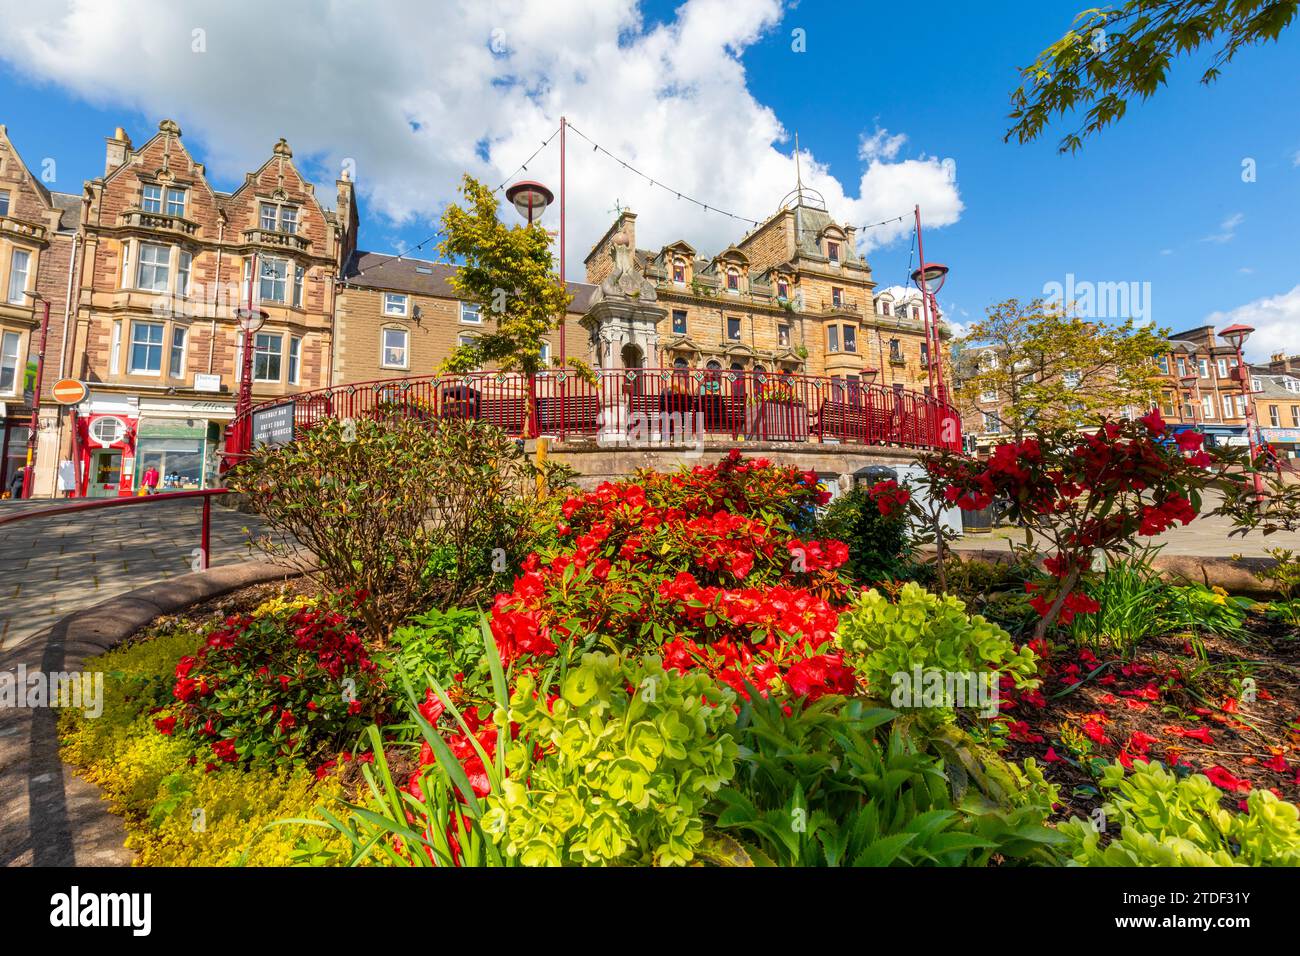 Flowers at James Square, Crieff, Perthshire, Scotland, United Kingdom, Europe Stock Photo